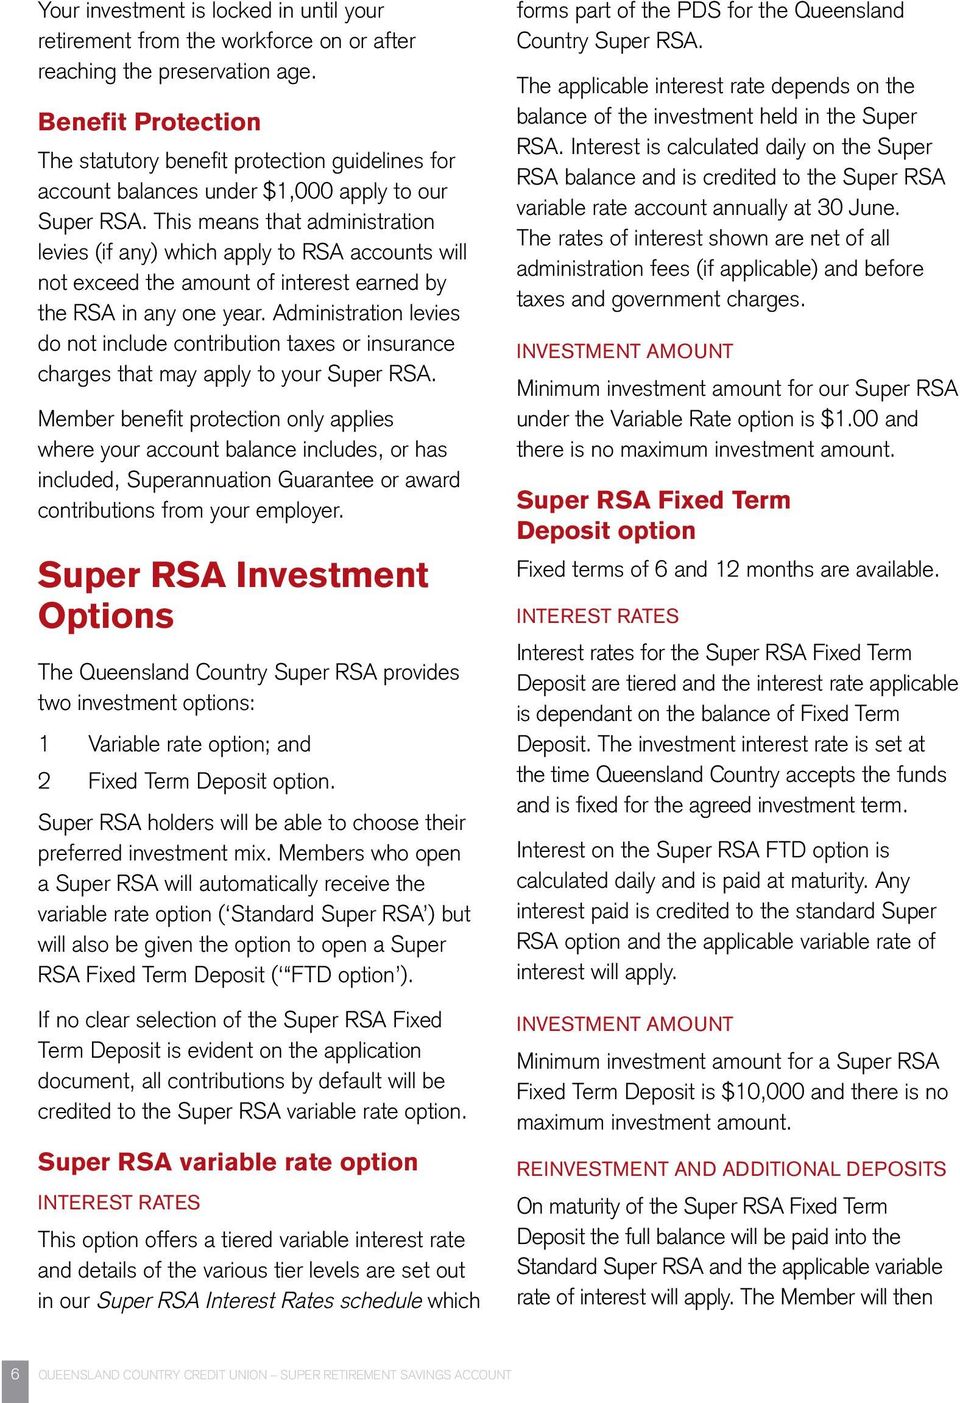 This means that administration levies (if any) which apply to RSA accounts will not exceed the amount of interest earned by the RSA in any one year.